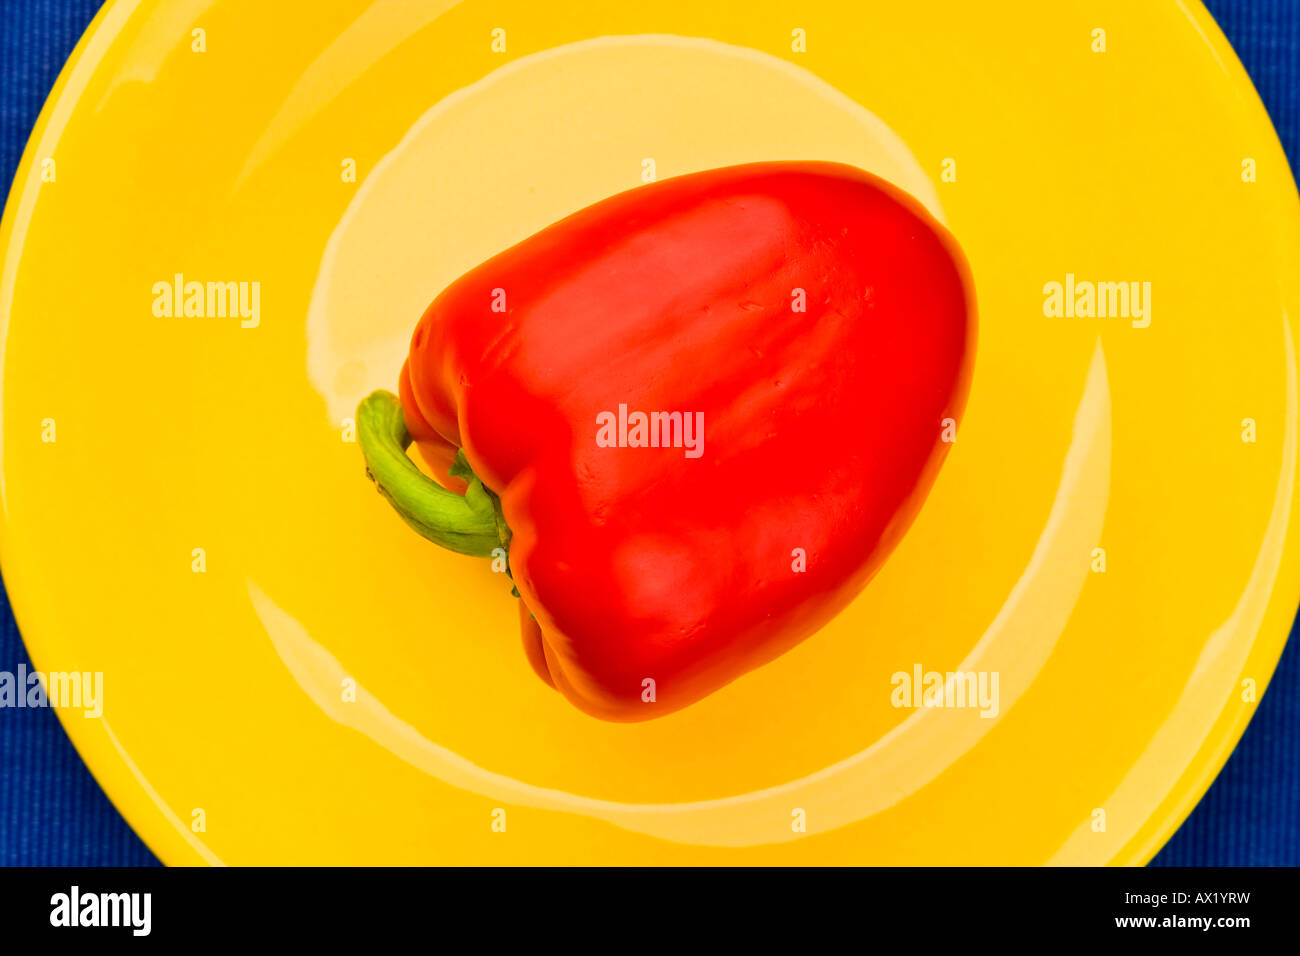 Red pepper (capsicum) on yellow plate Stock Photo